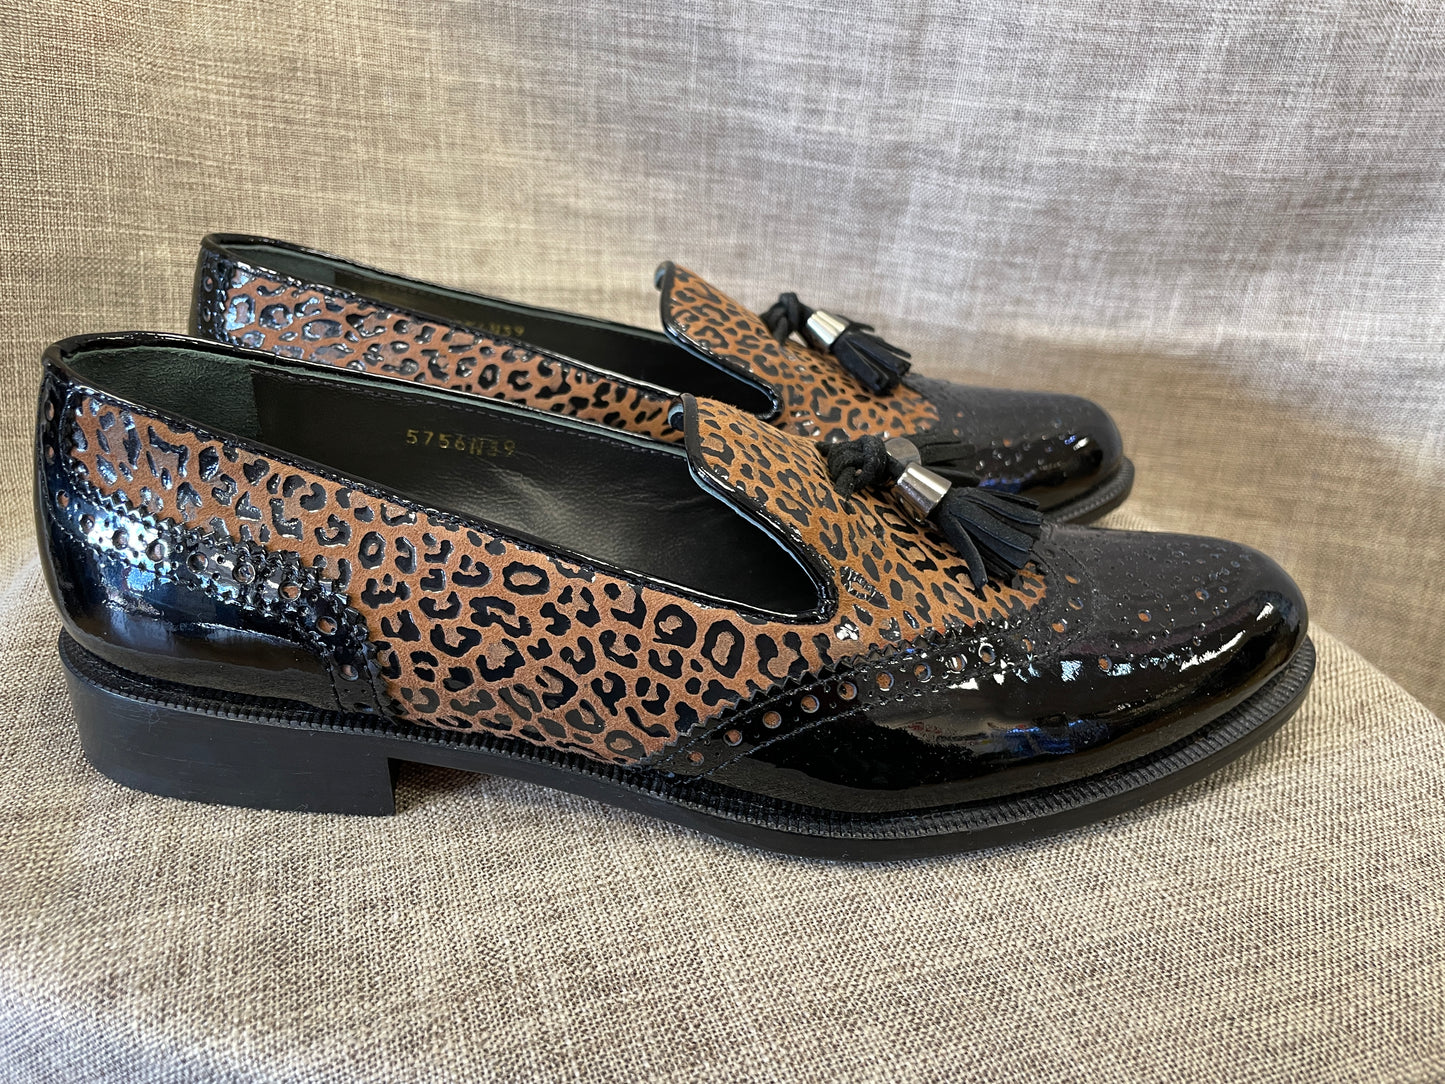 New HB Espana Black Patent Brown Animal Print Leather Loafers Shoes UK 6